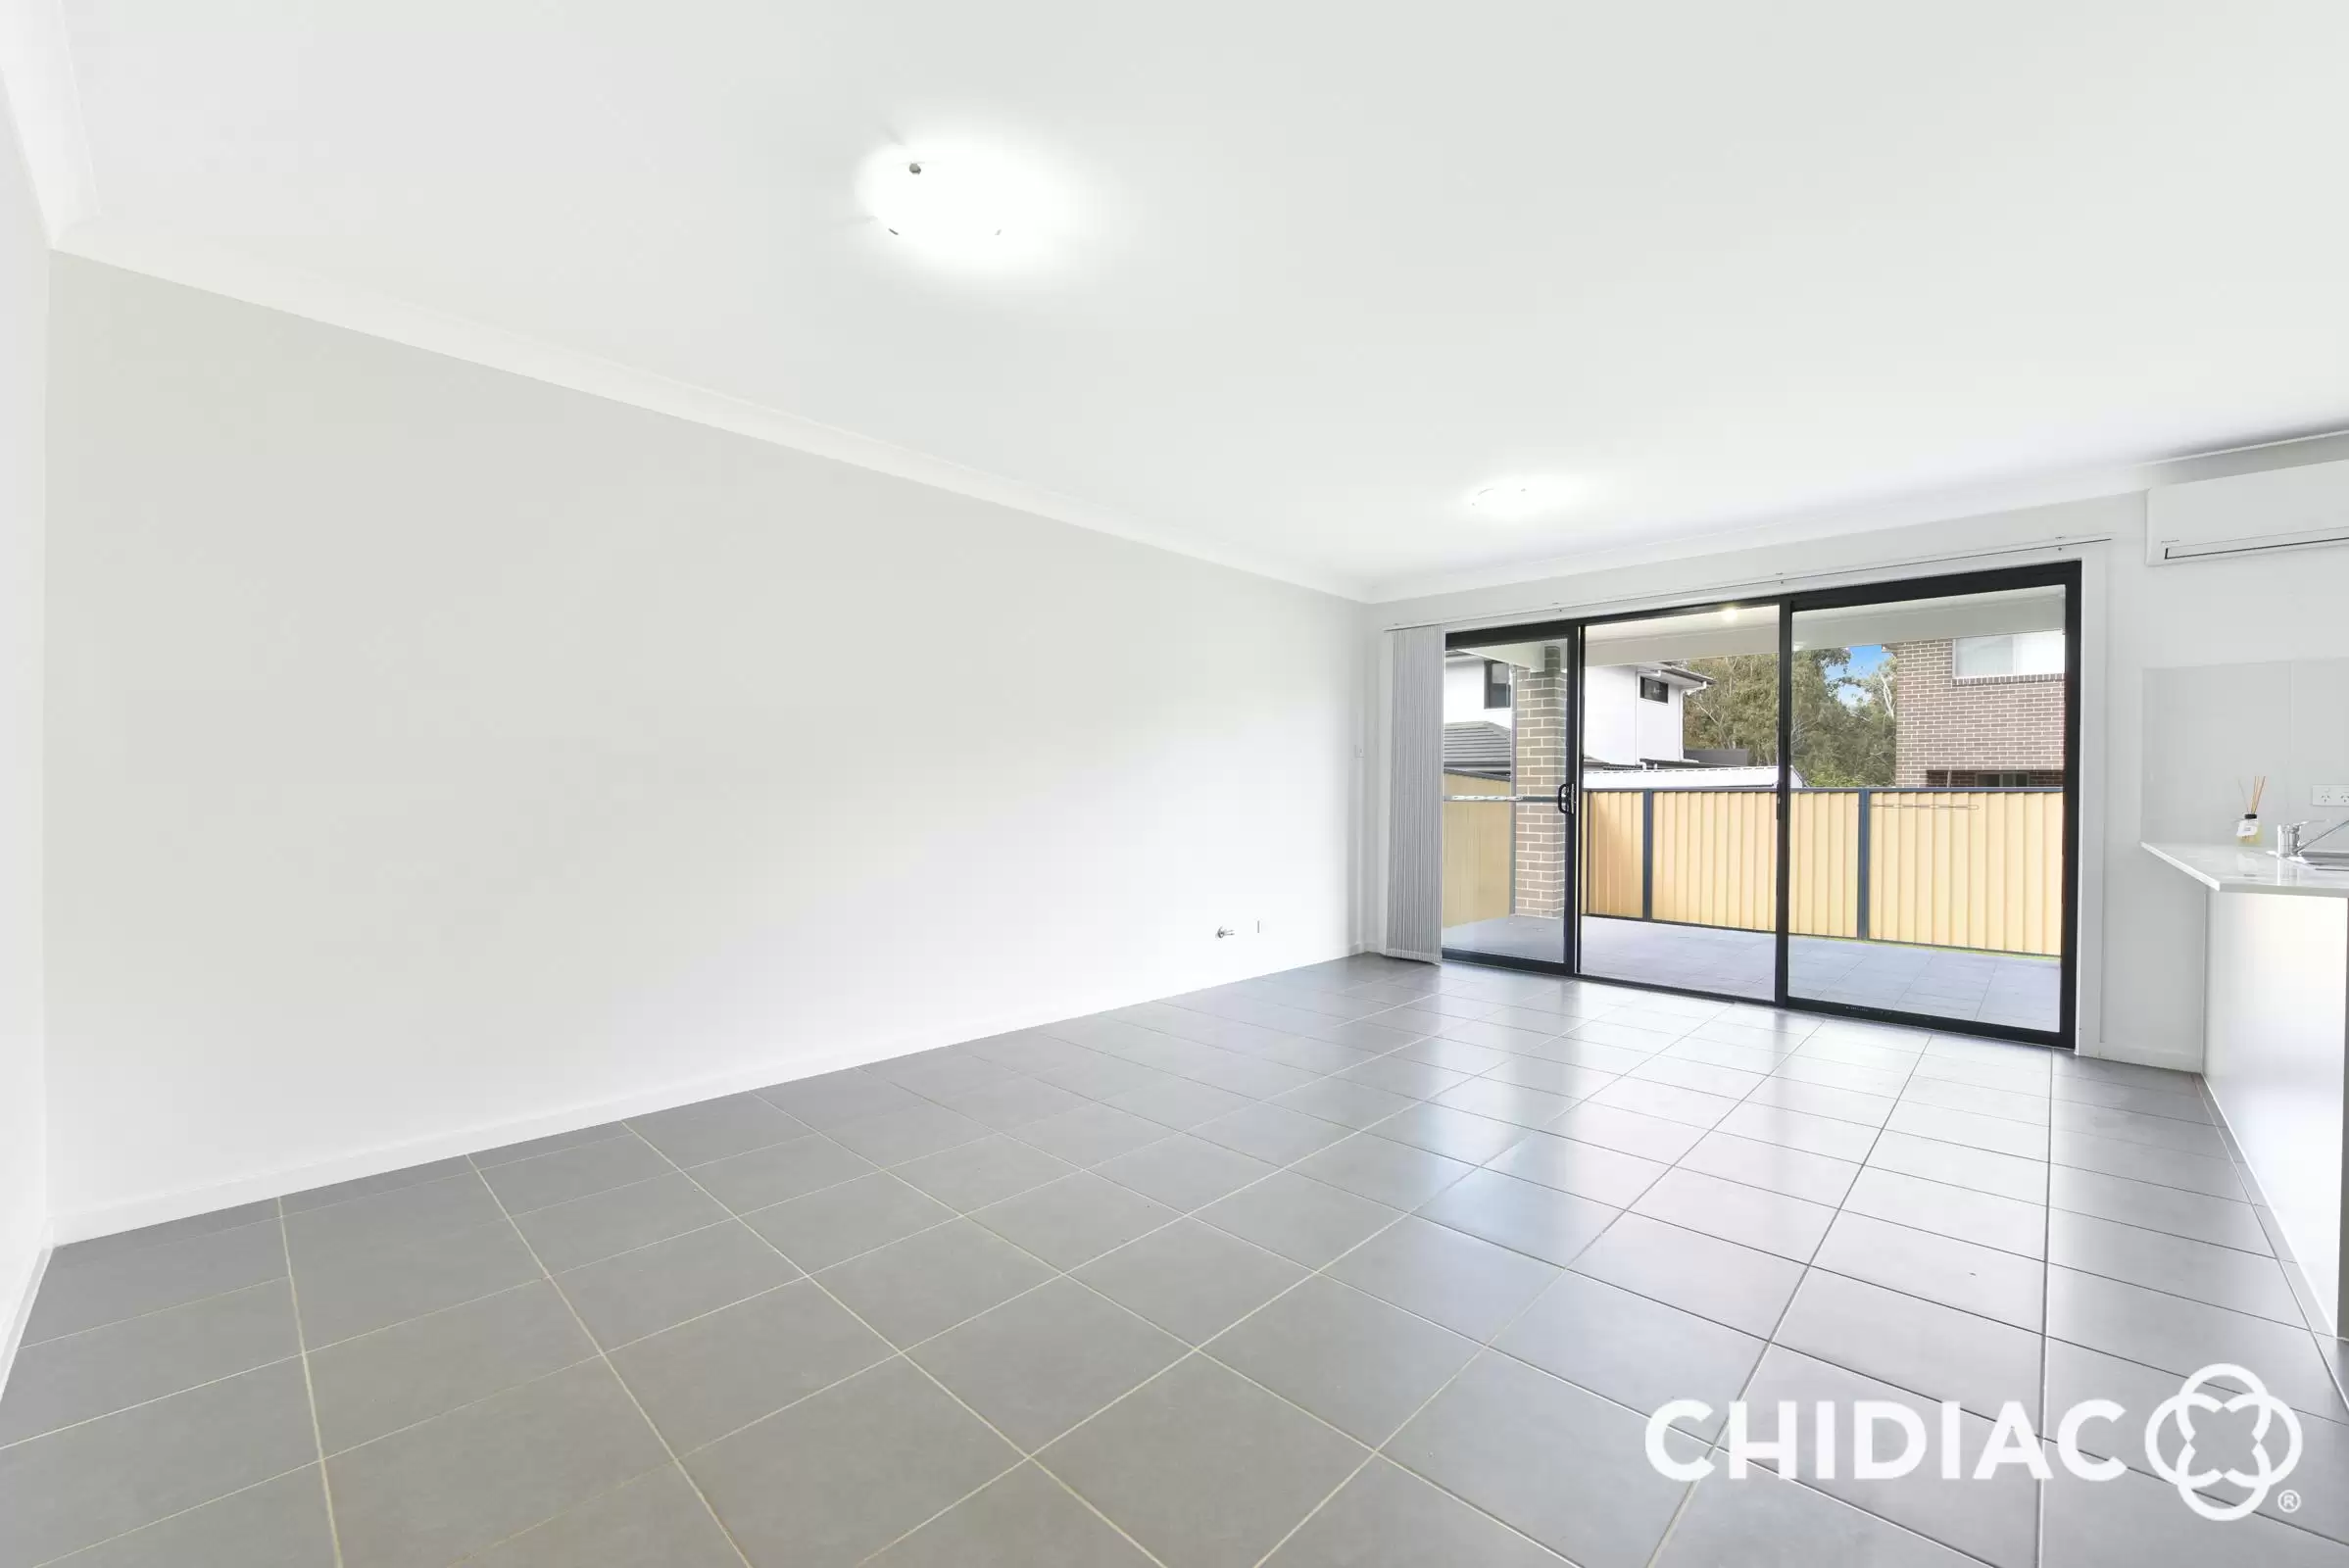 33 Changsha Road, Edmondson Park Leased by Chidiac Realty - image 2